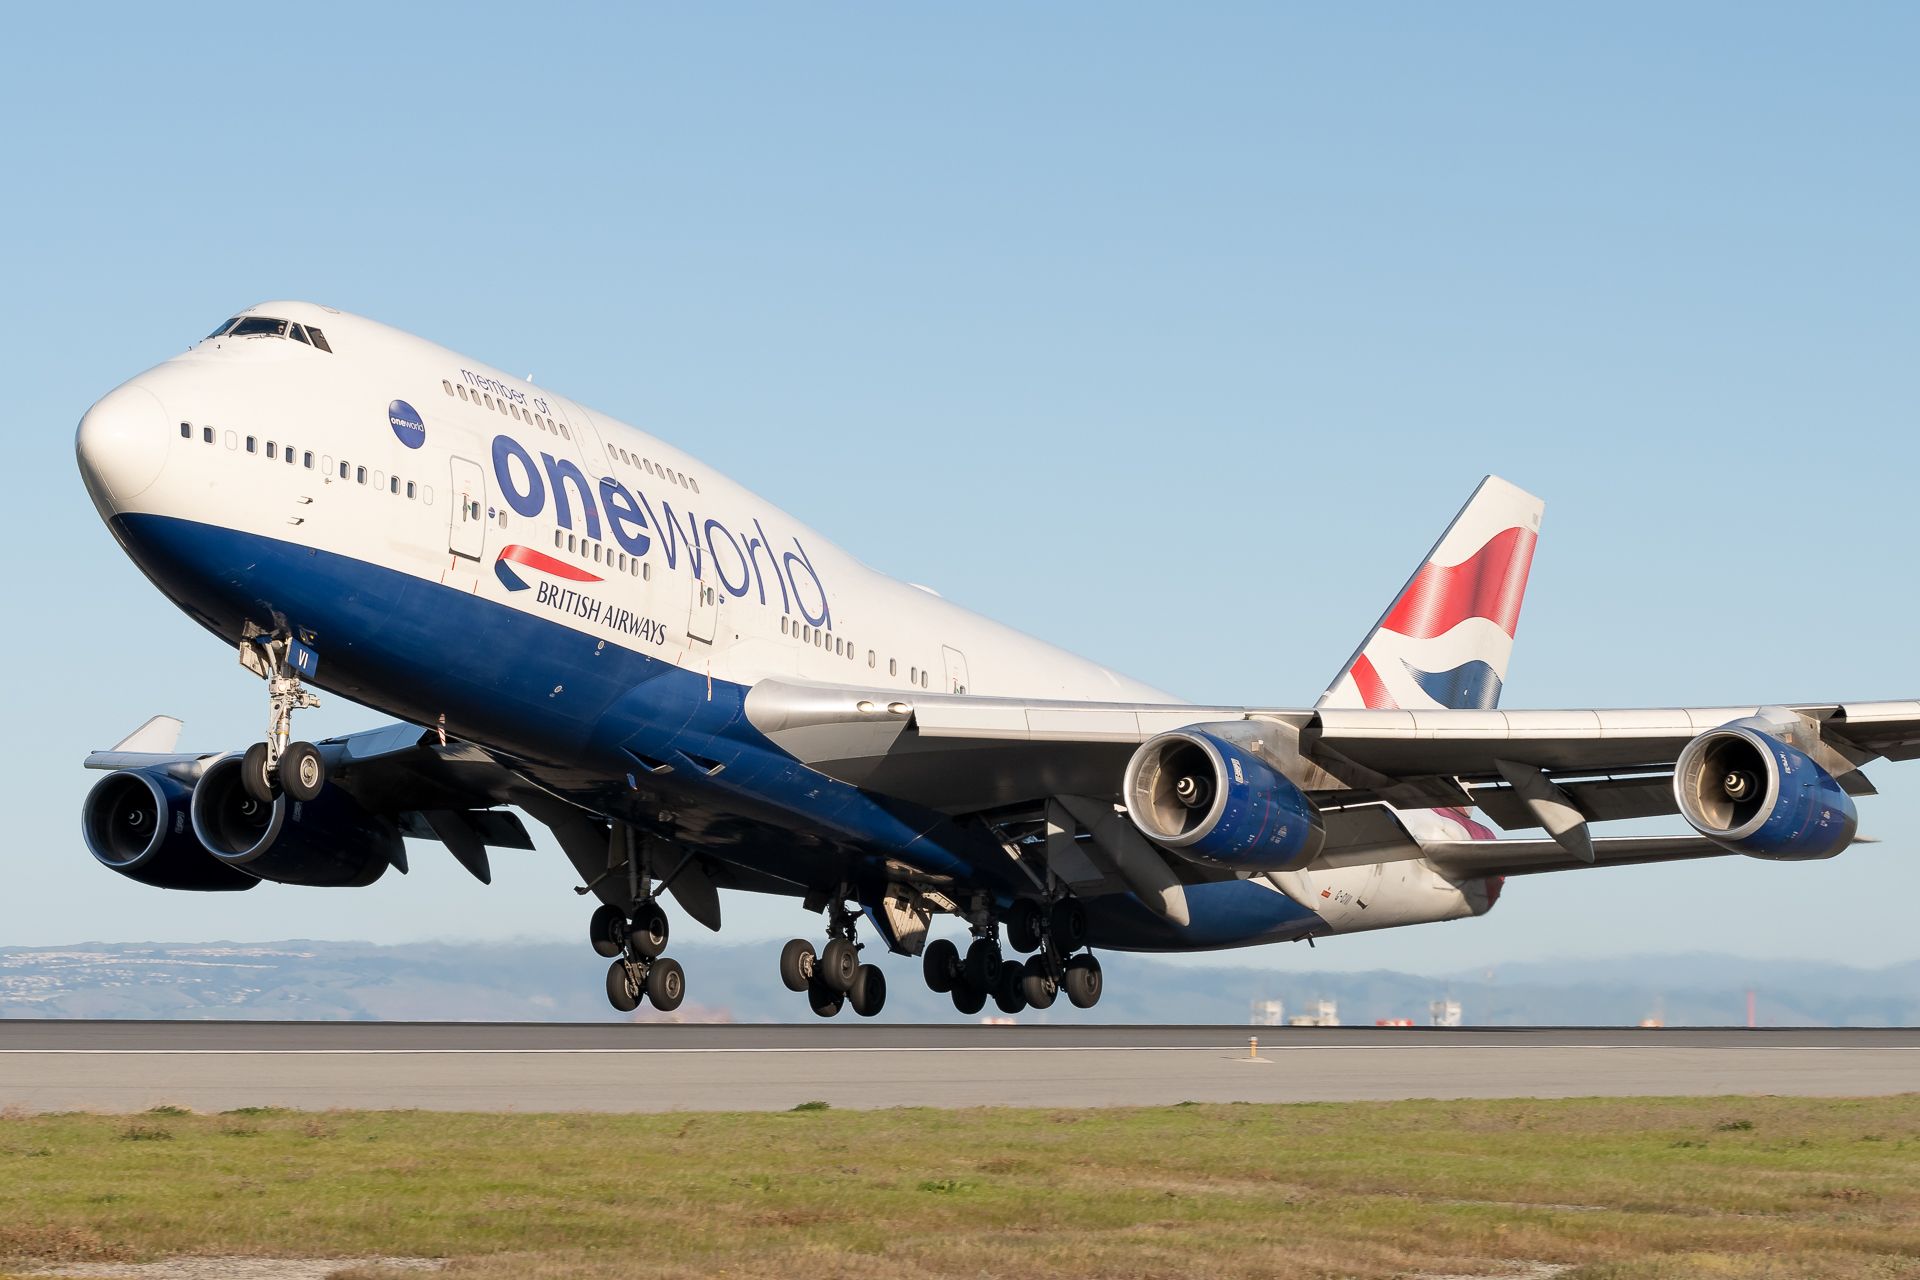 A British Airways Boeing 747-436 in Oneworld livery just after taking off.